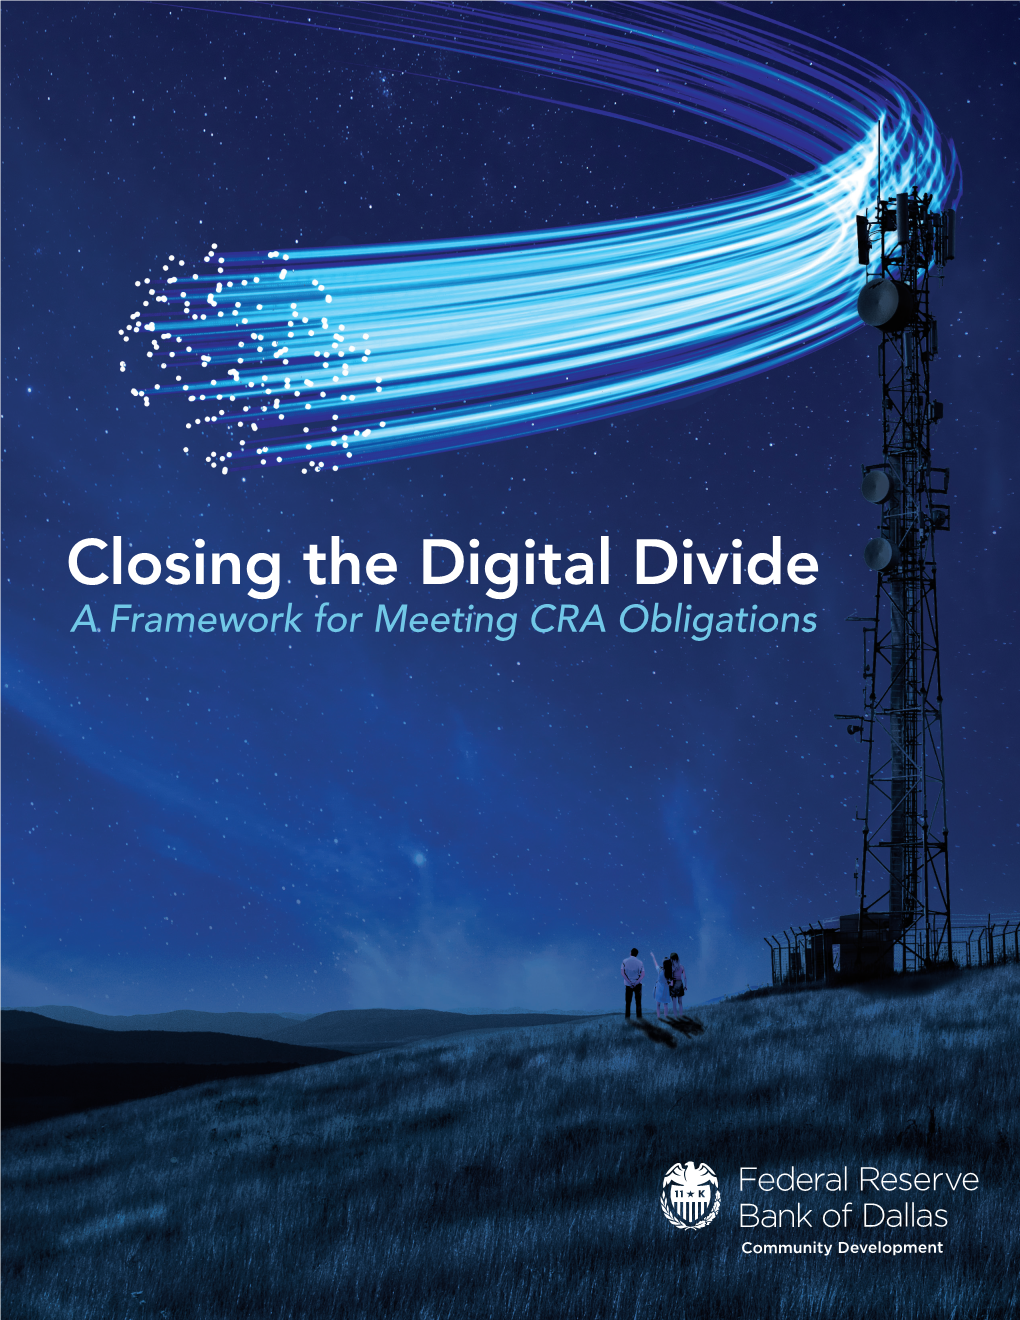 Closing the Digital Divide: a Framework for Meeting CRA Obligations" to Help Guide Our Community Development Strategy.”